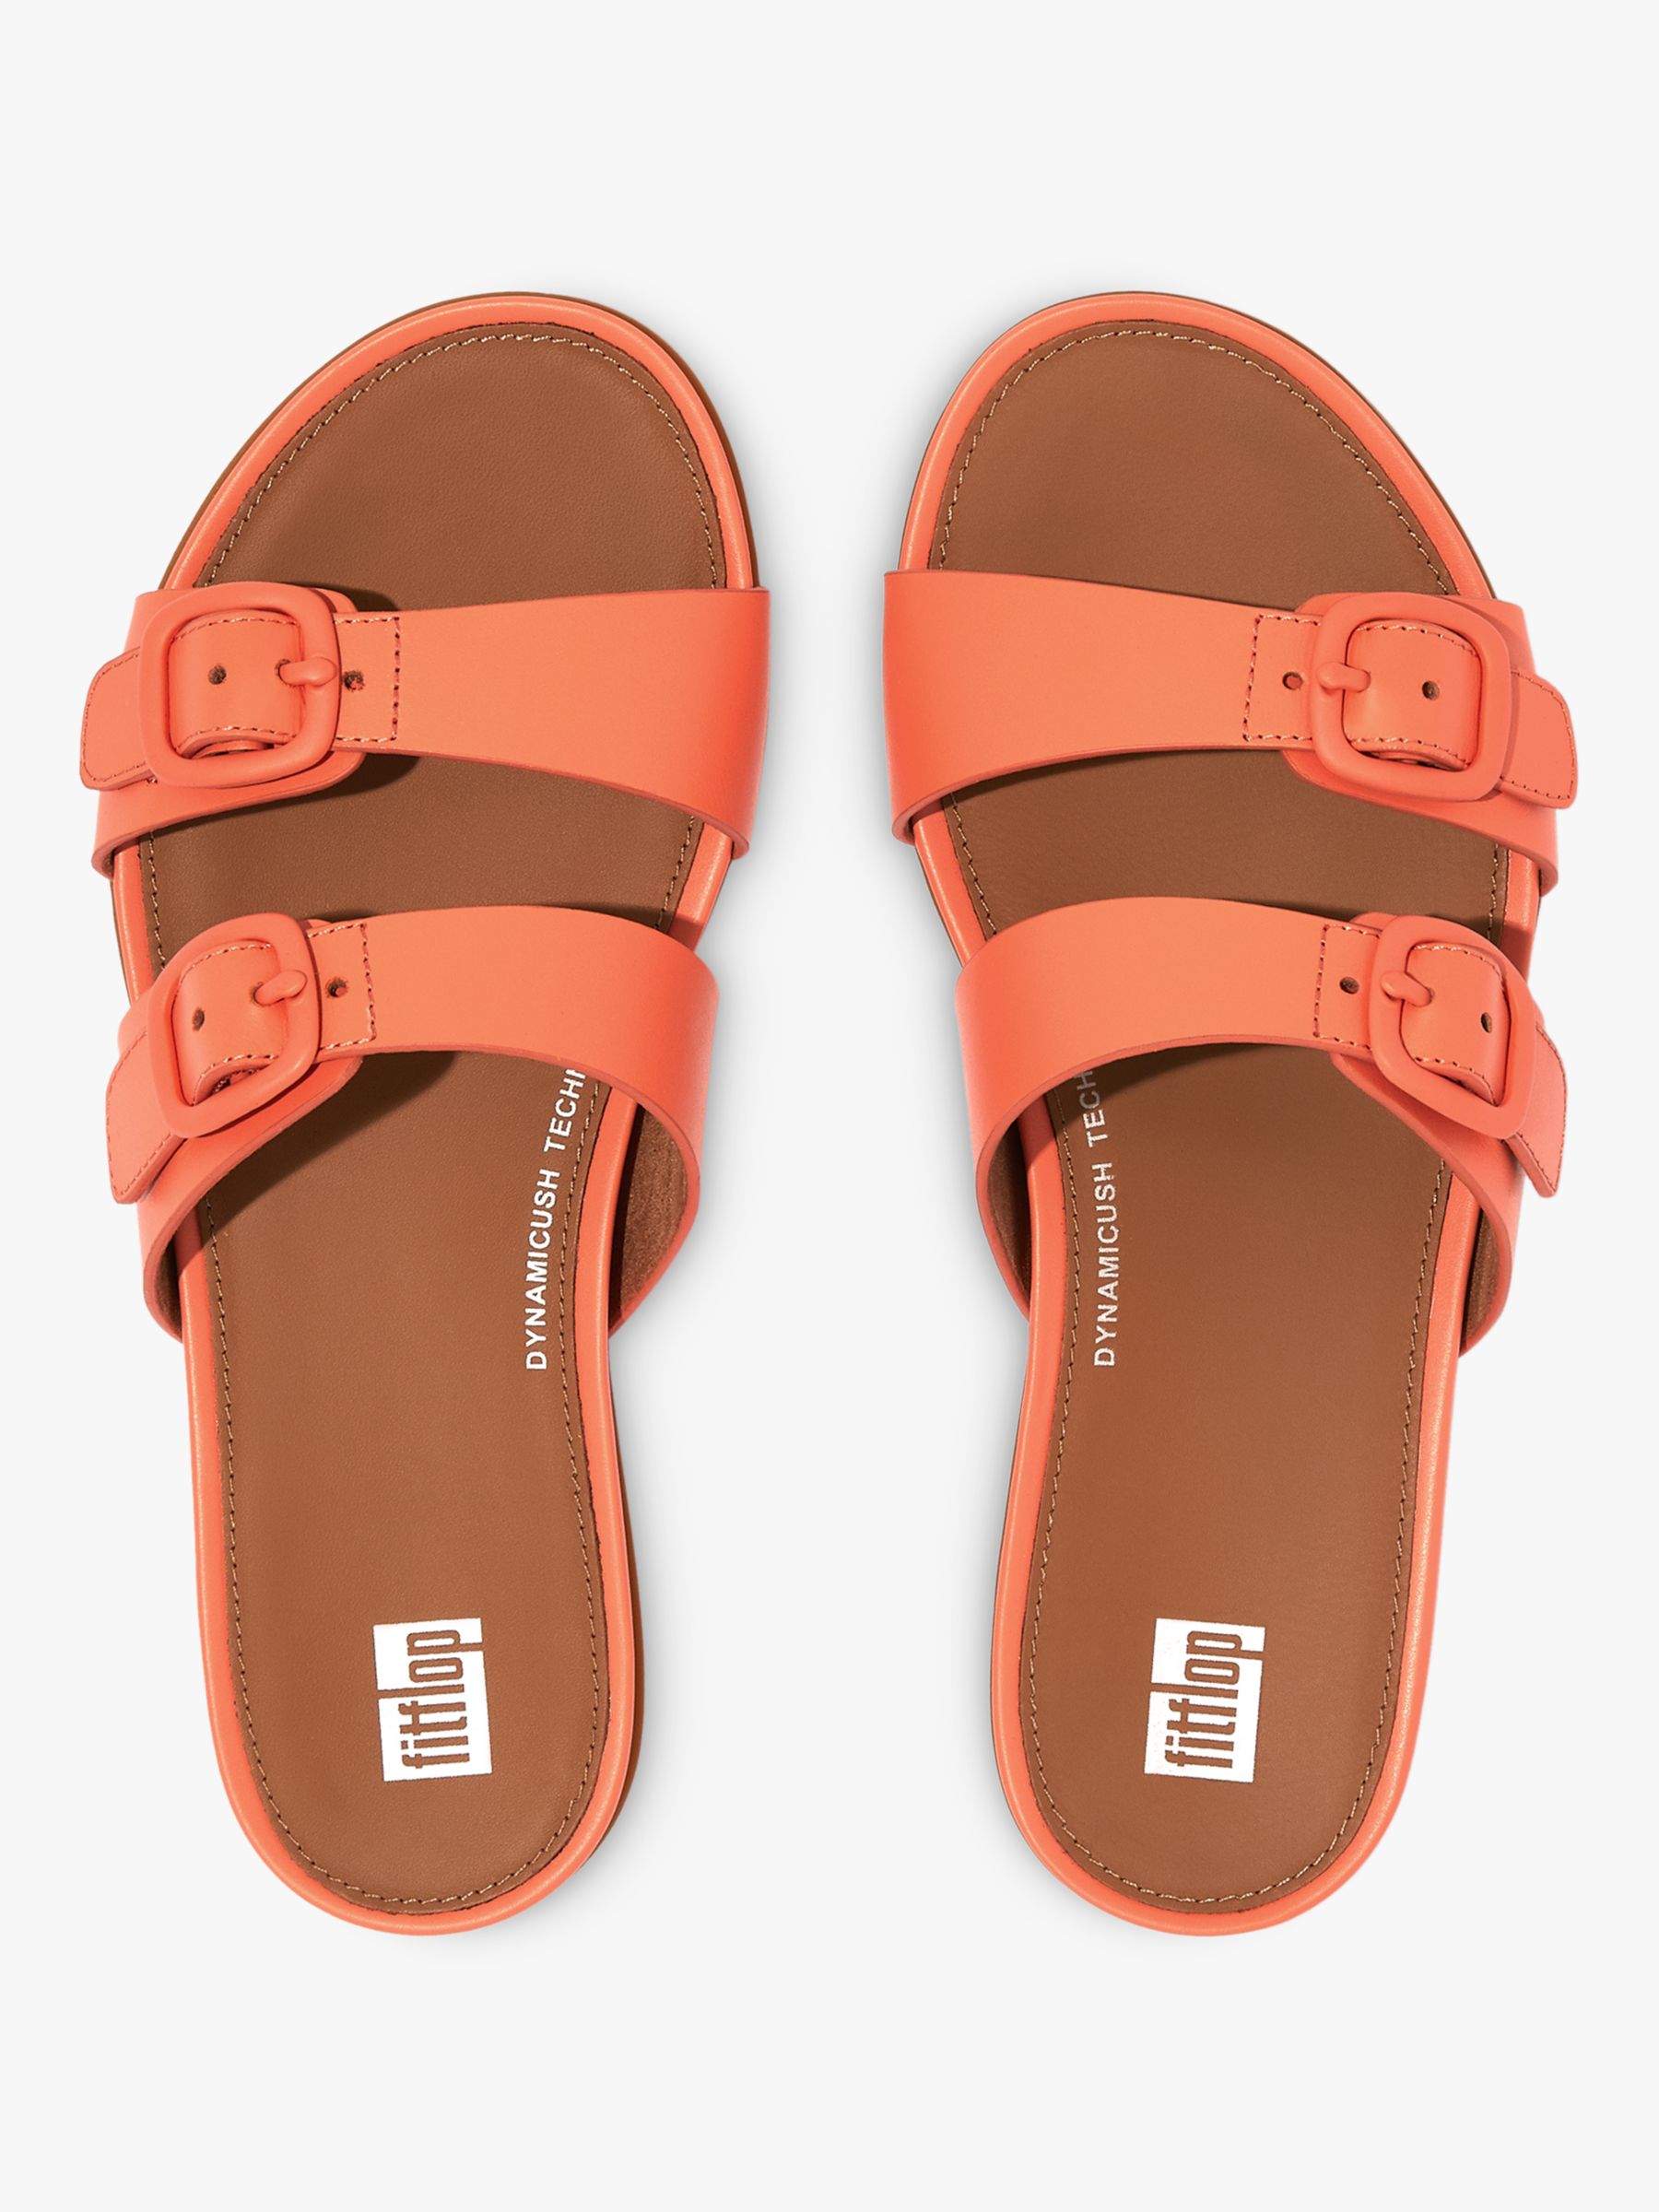 FitFlop Gracie Leather Two Strap Sandals, Sunshine Coral at John